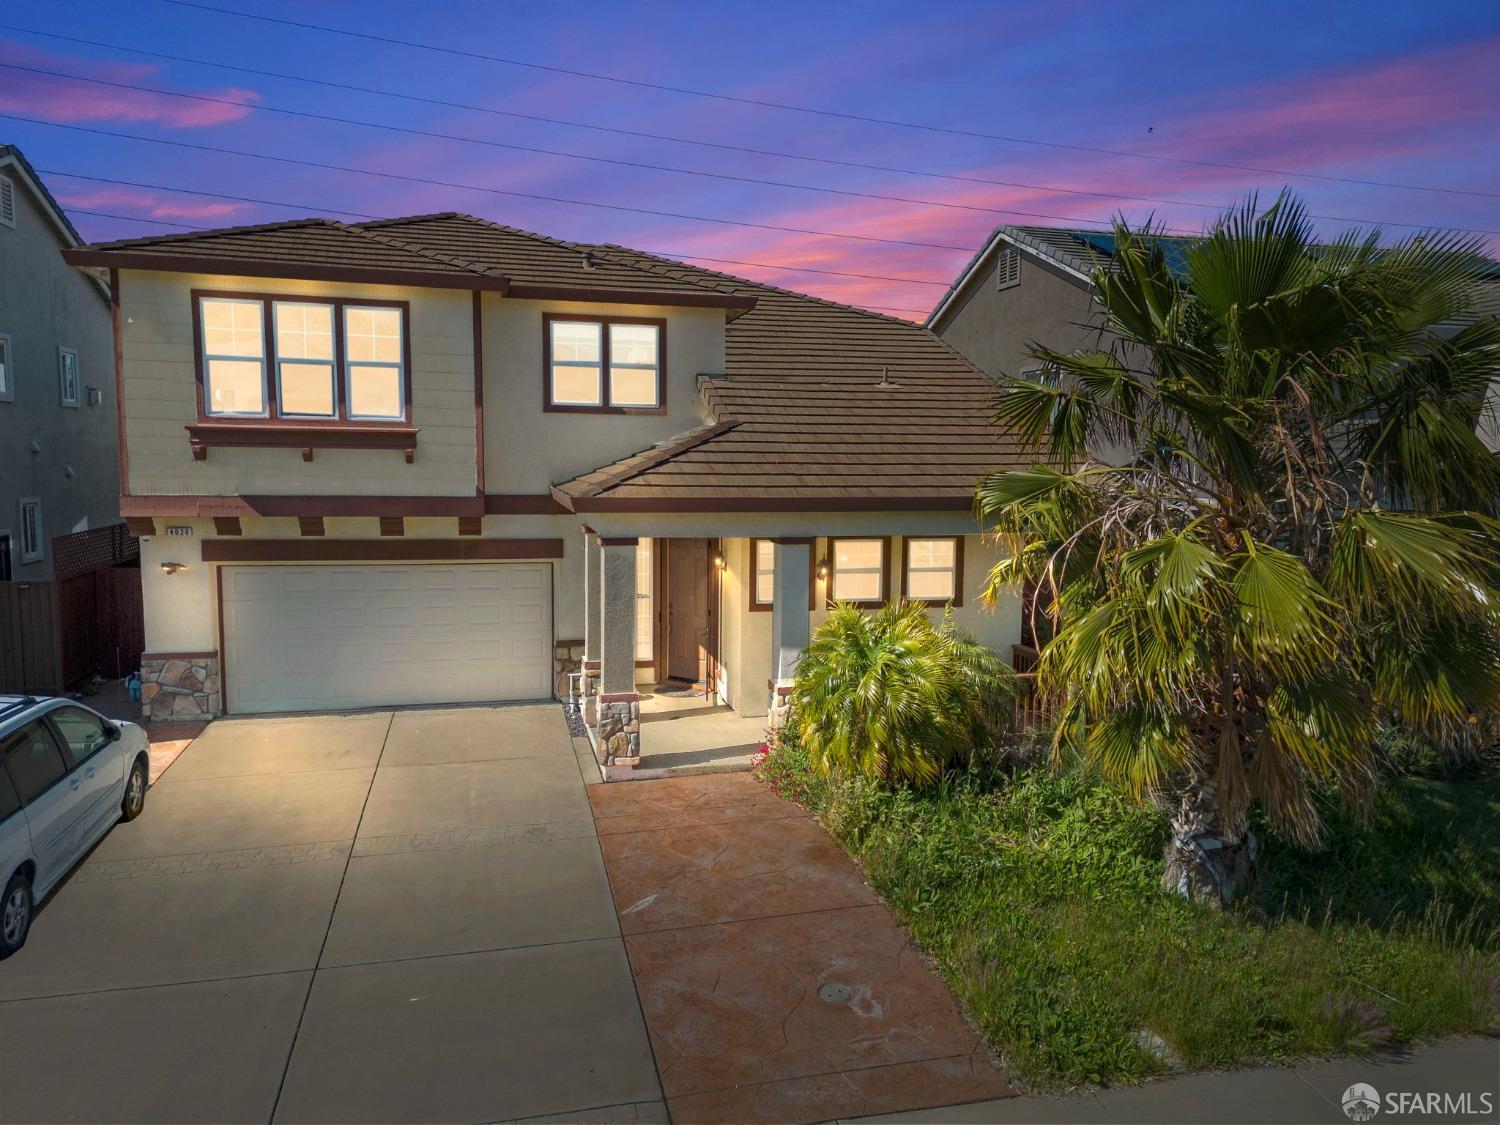 Photo of 4020 Crescent Ct in Antioch, CA